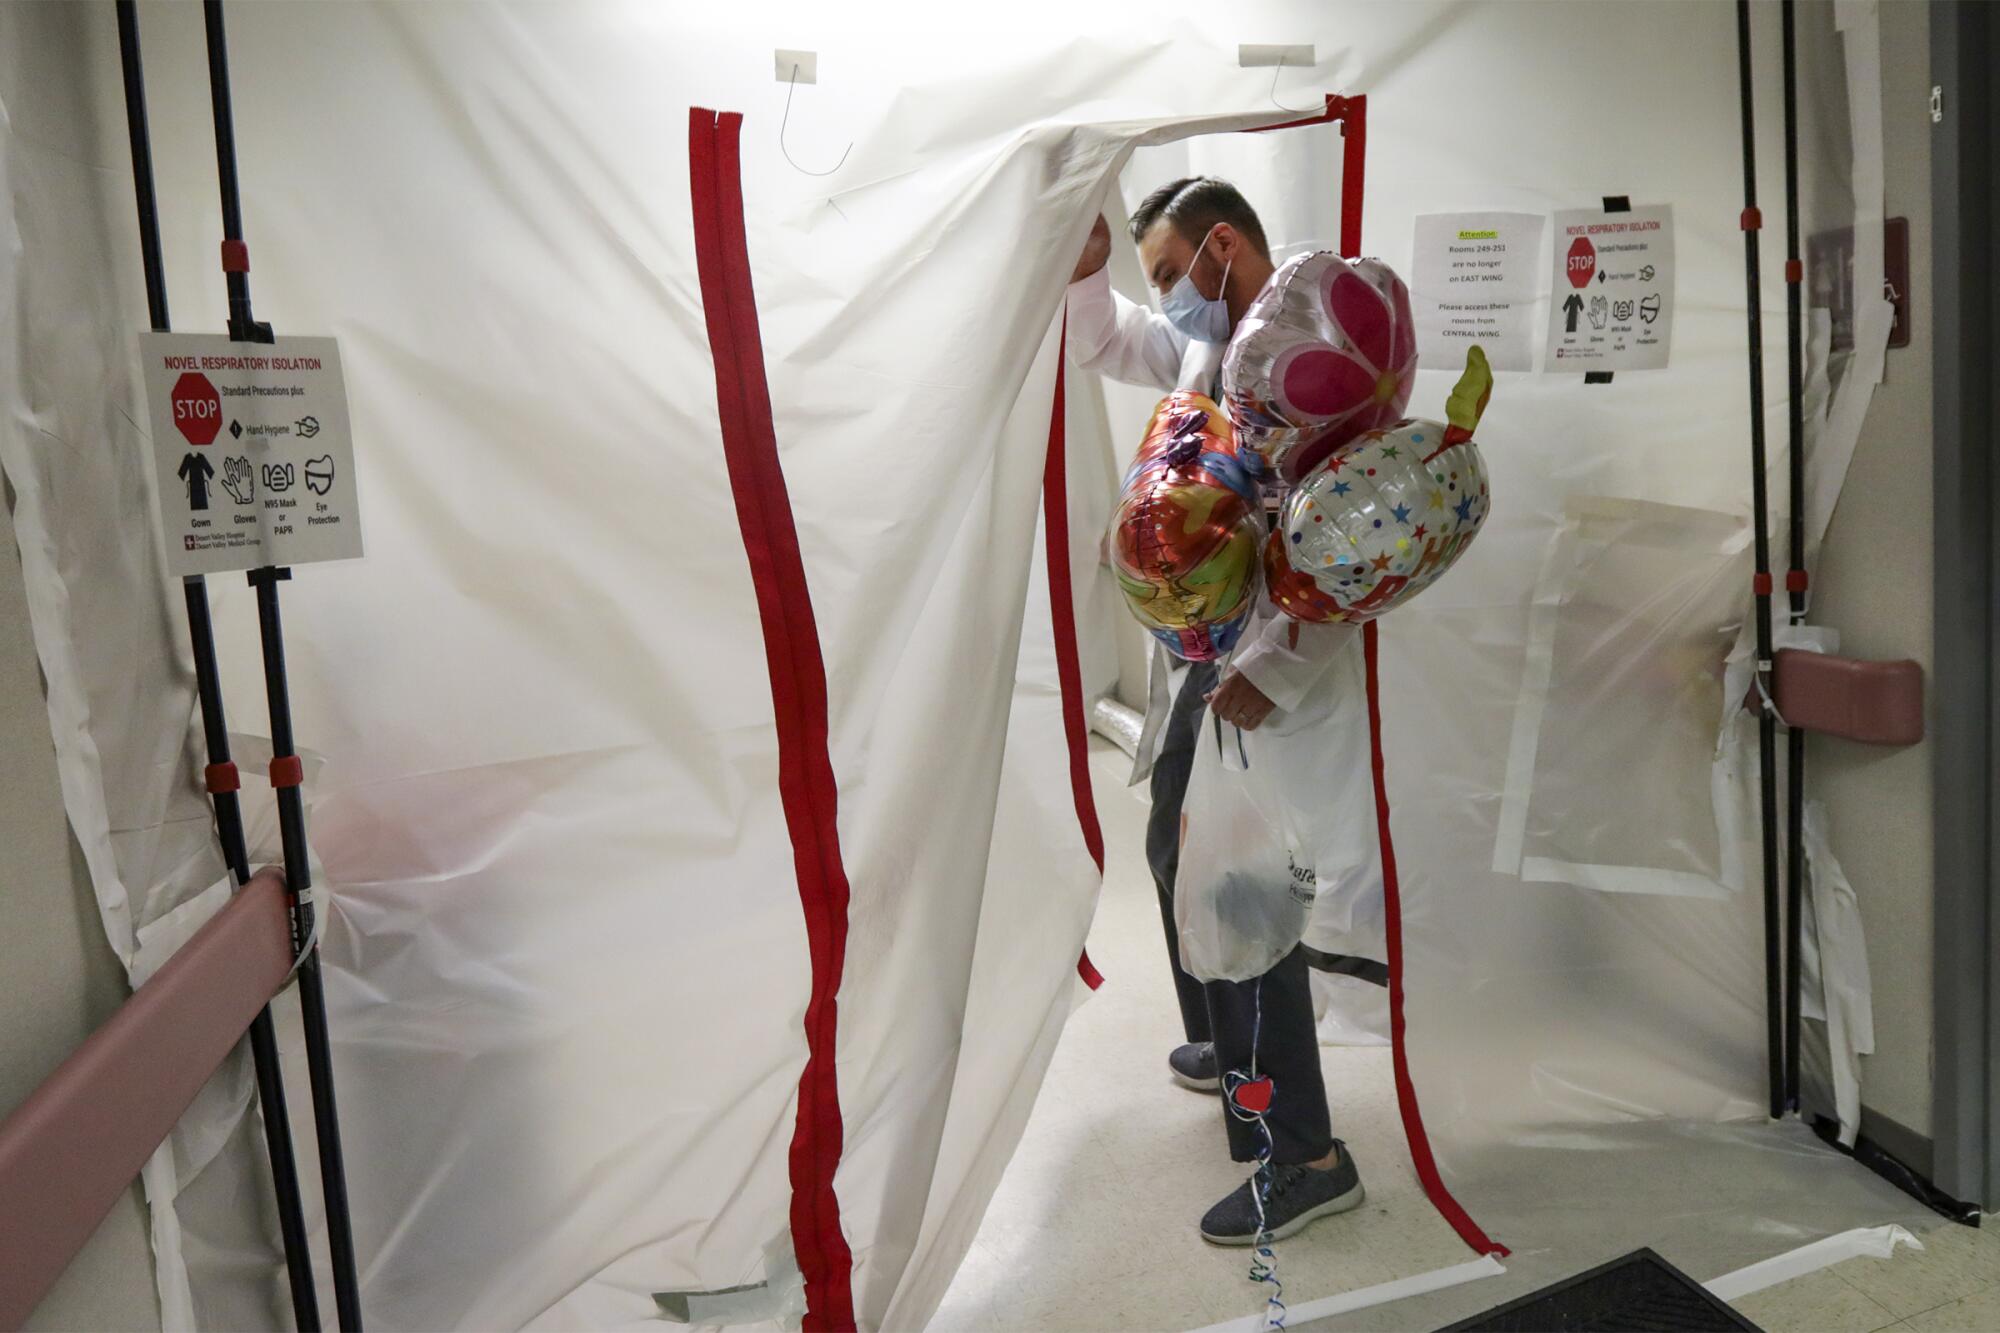 Dr. Imran Siddiqui enters negative pressure enclosure with balloons for his patient.